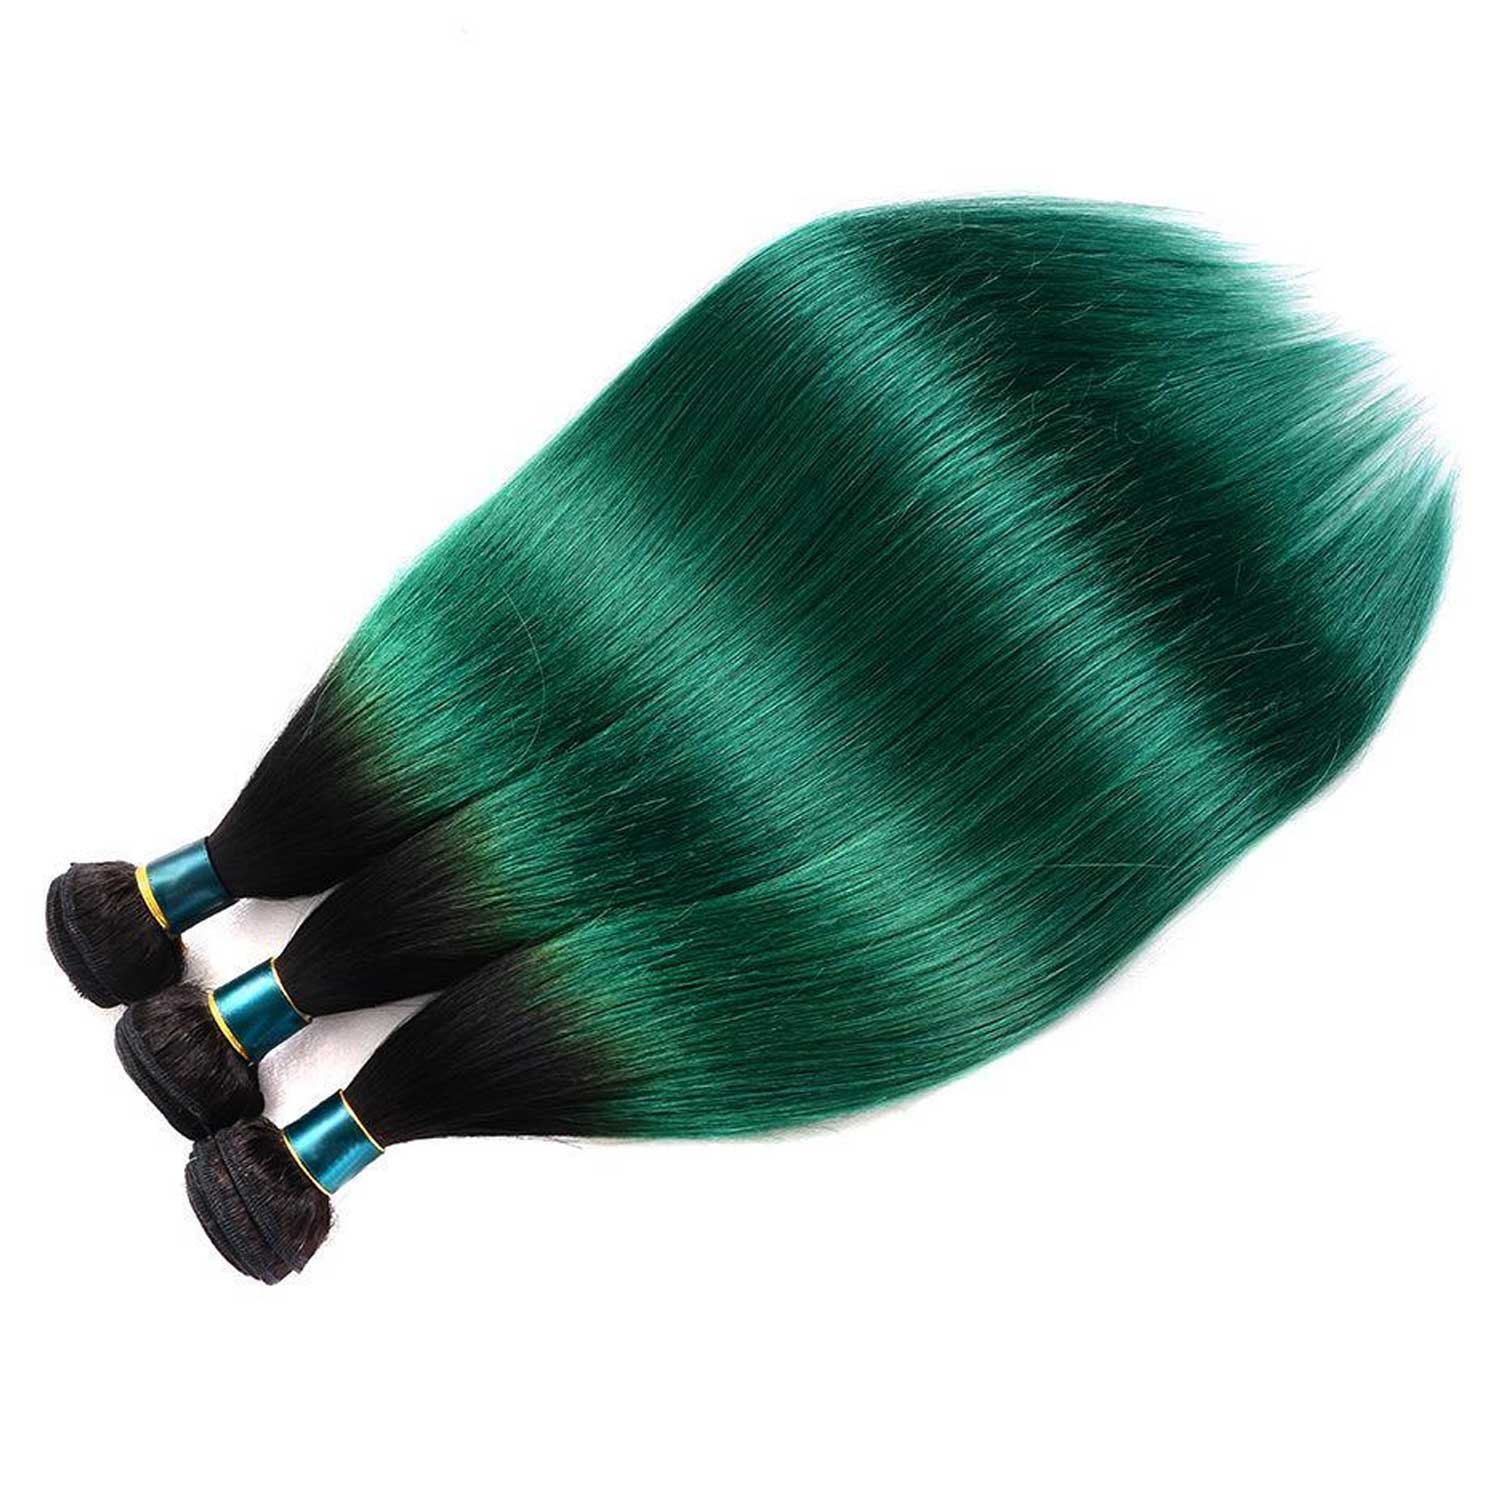 Ombre Green Human Hair Weave 3 Bundles Deals with Dark Roots